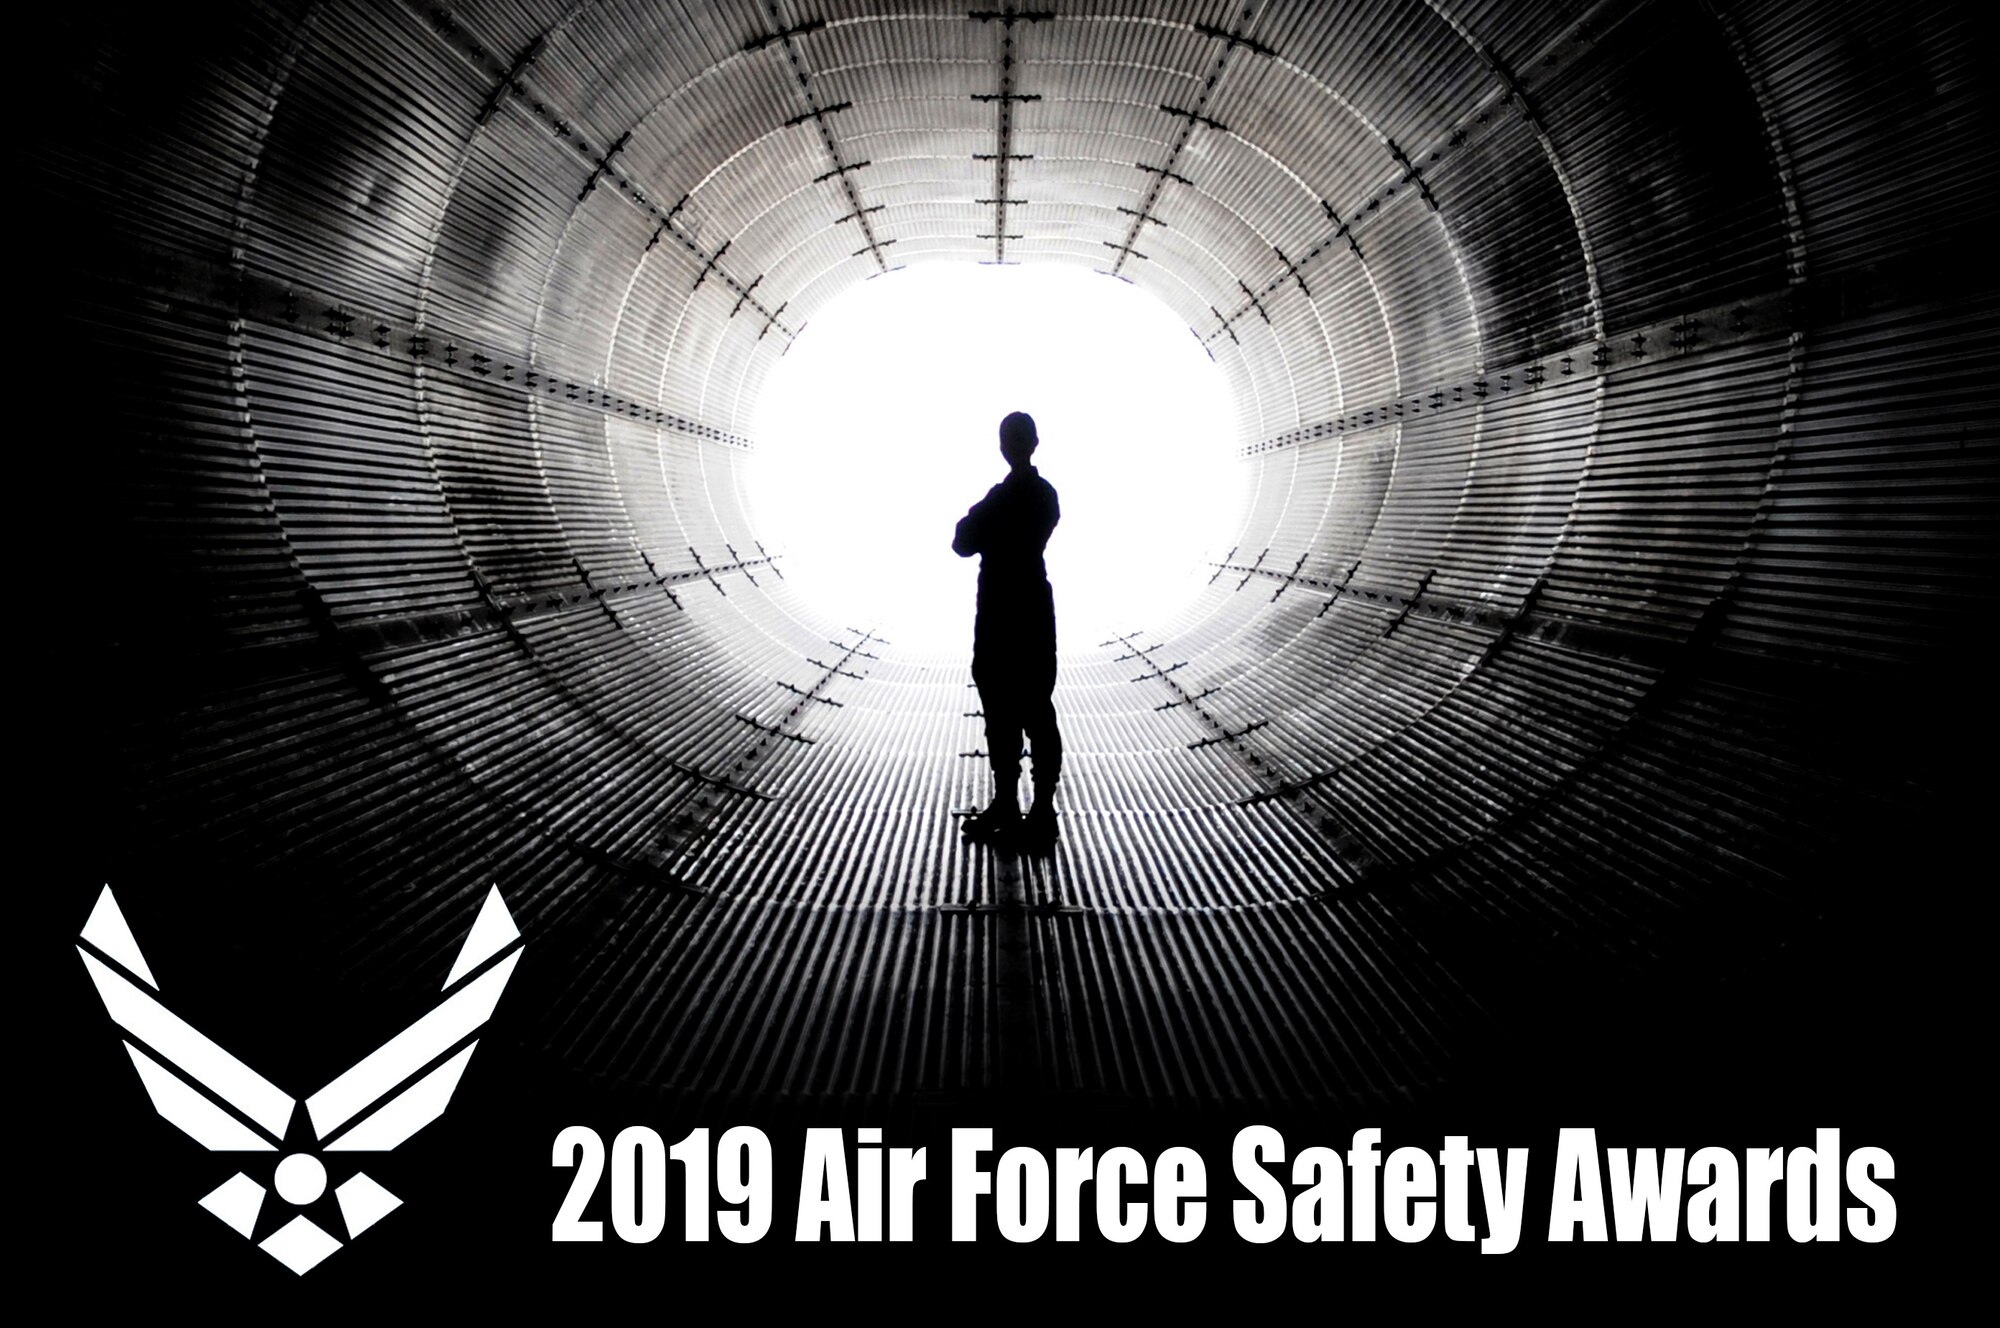 2019 Air Force Safety Awards graphic depicted by silhouette in the middle of a wind tunnel.